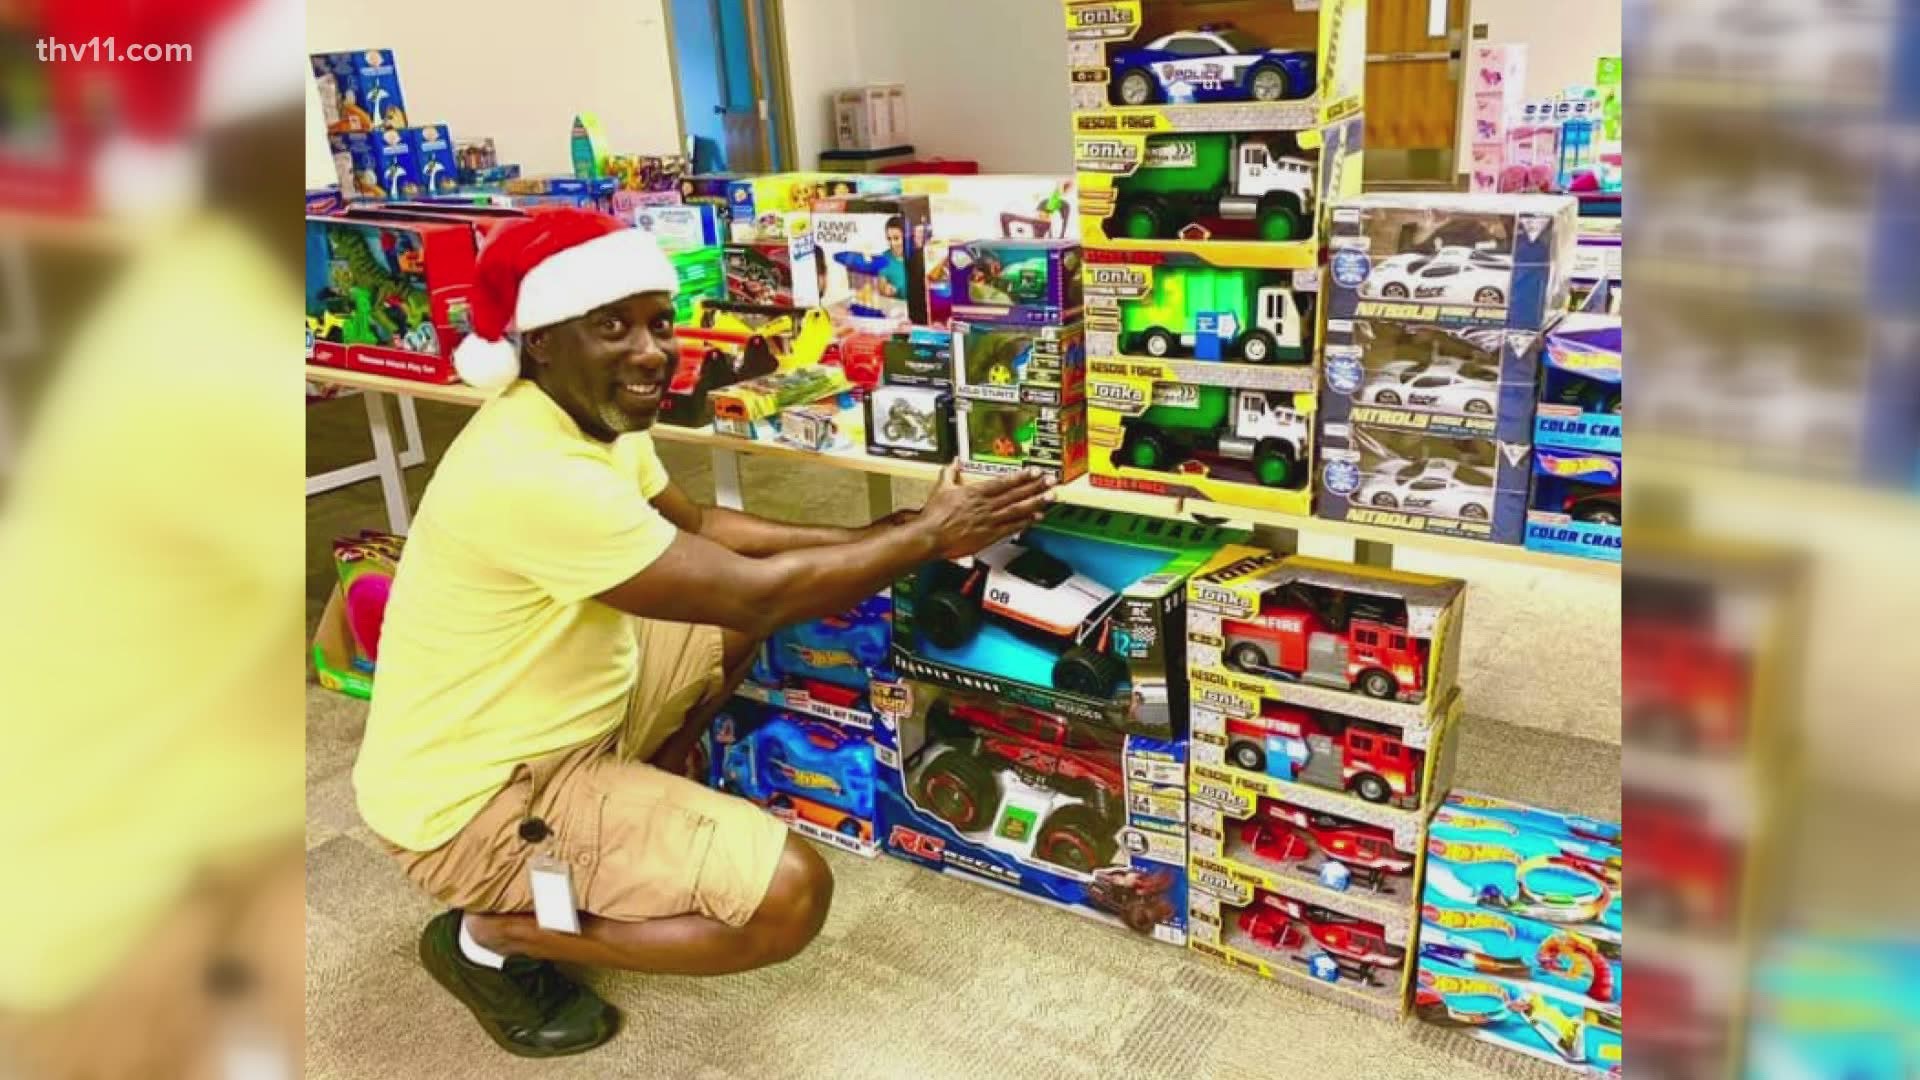 'Black Santa' is a Conway man who buys Christmas gifts for hundreds of kids each year. Now, he needs donations.